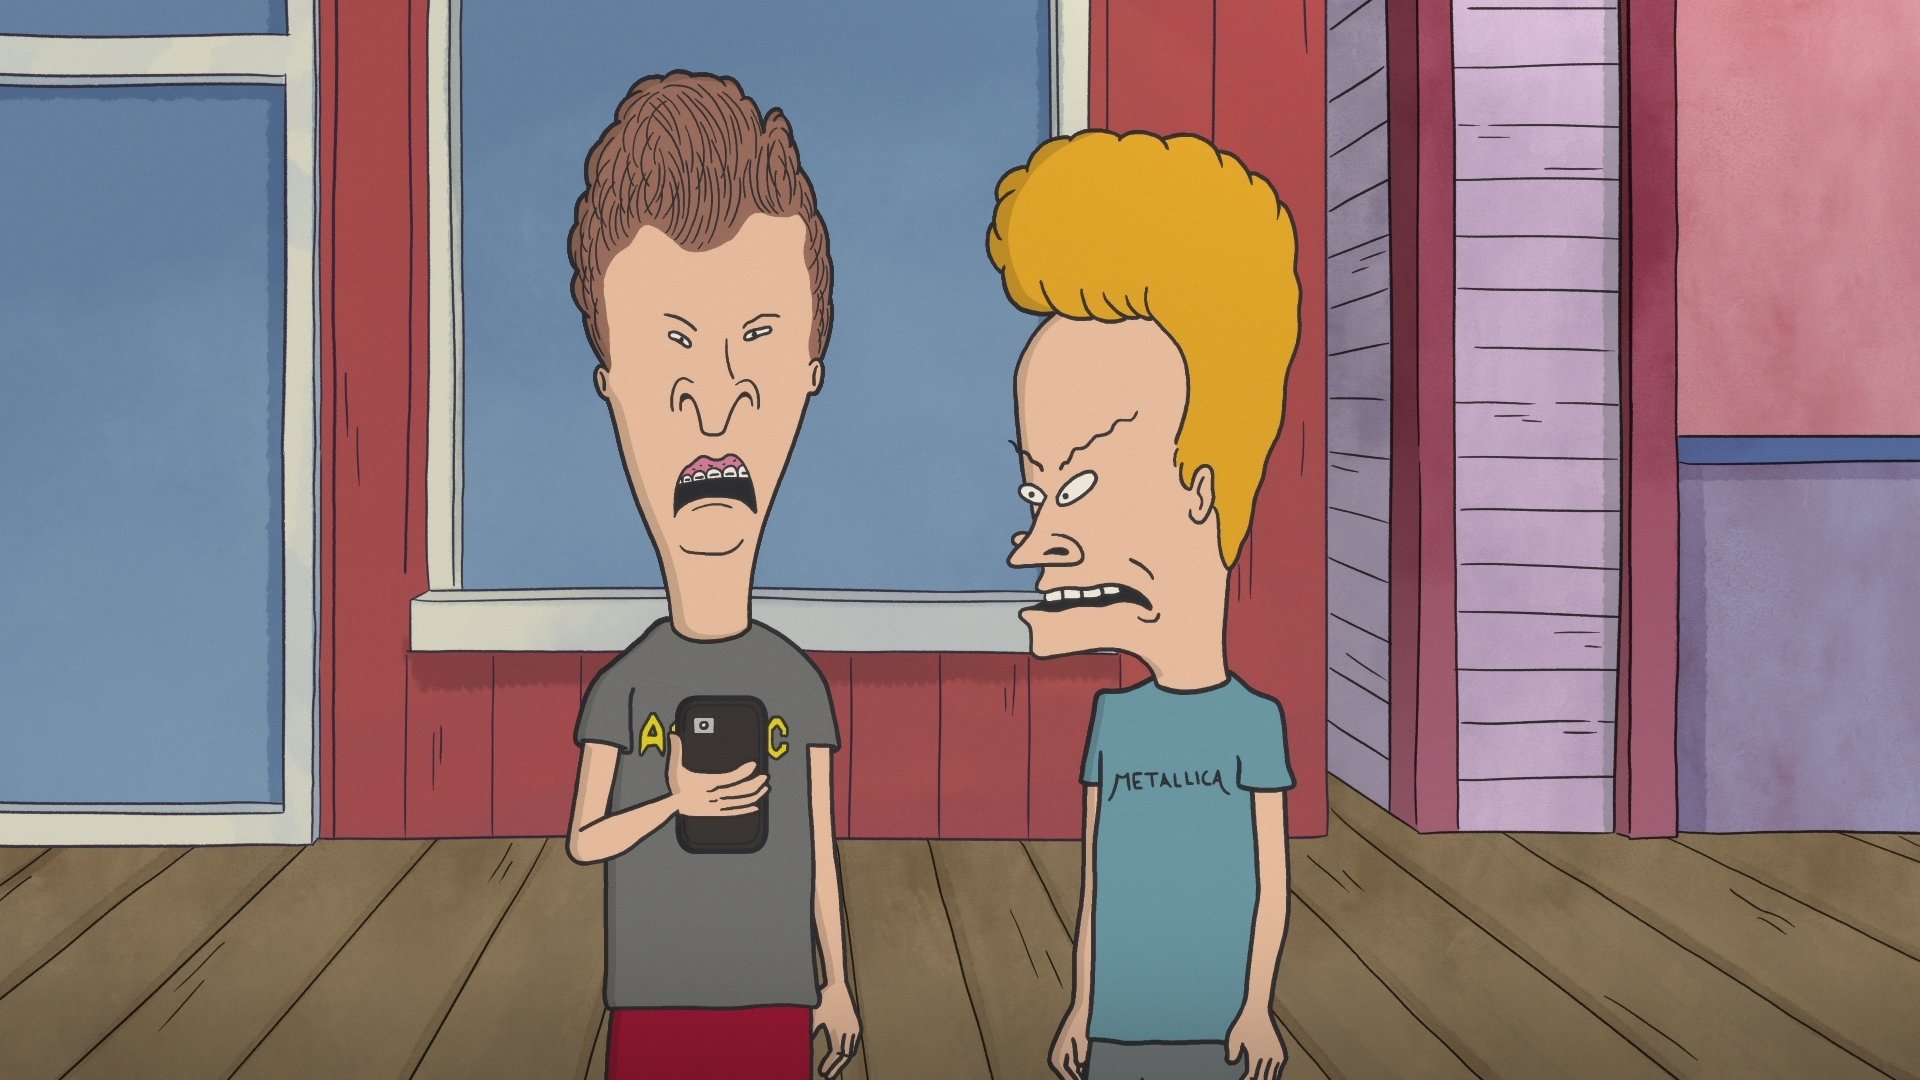 Beavis and Butt-Head look confused by a smartphone since they come from the '90s and reacted to the '80s